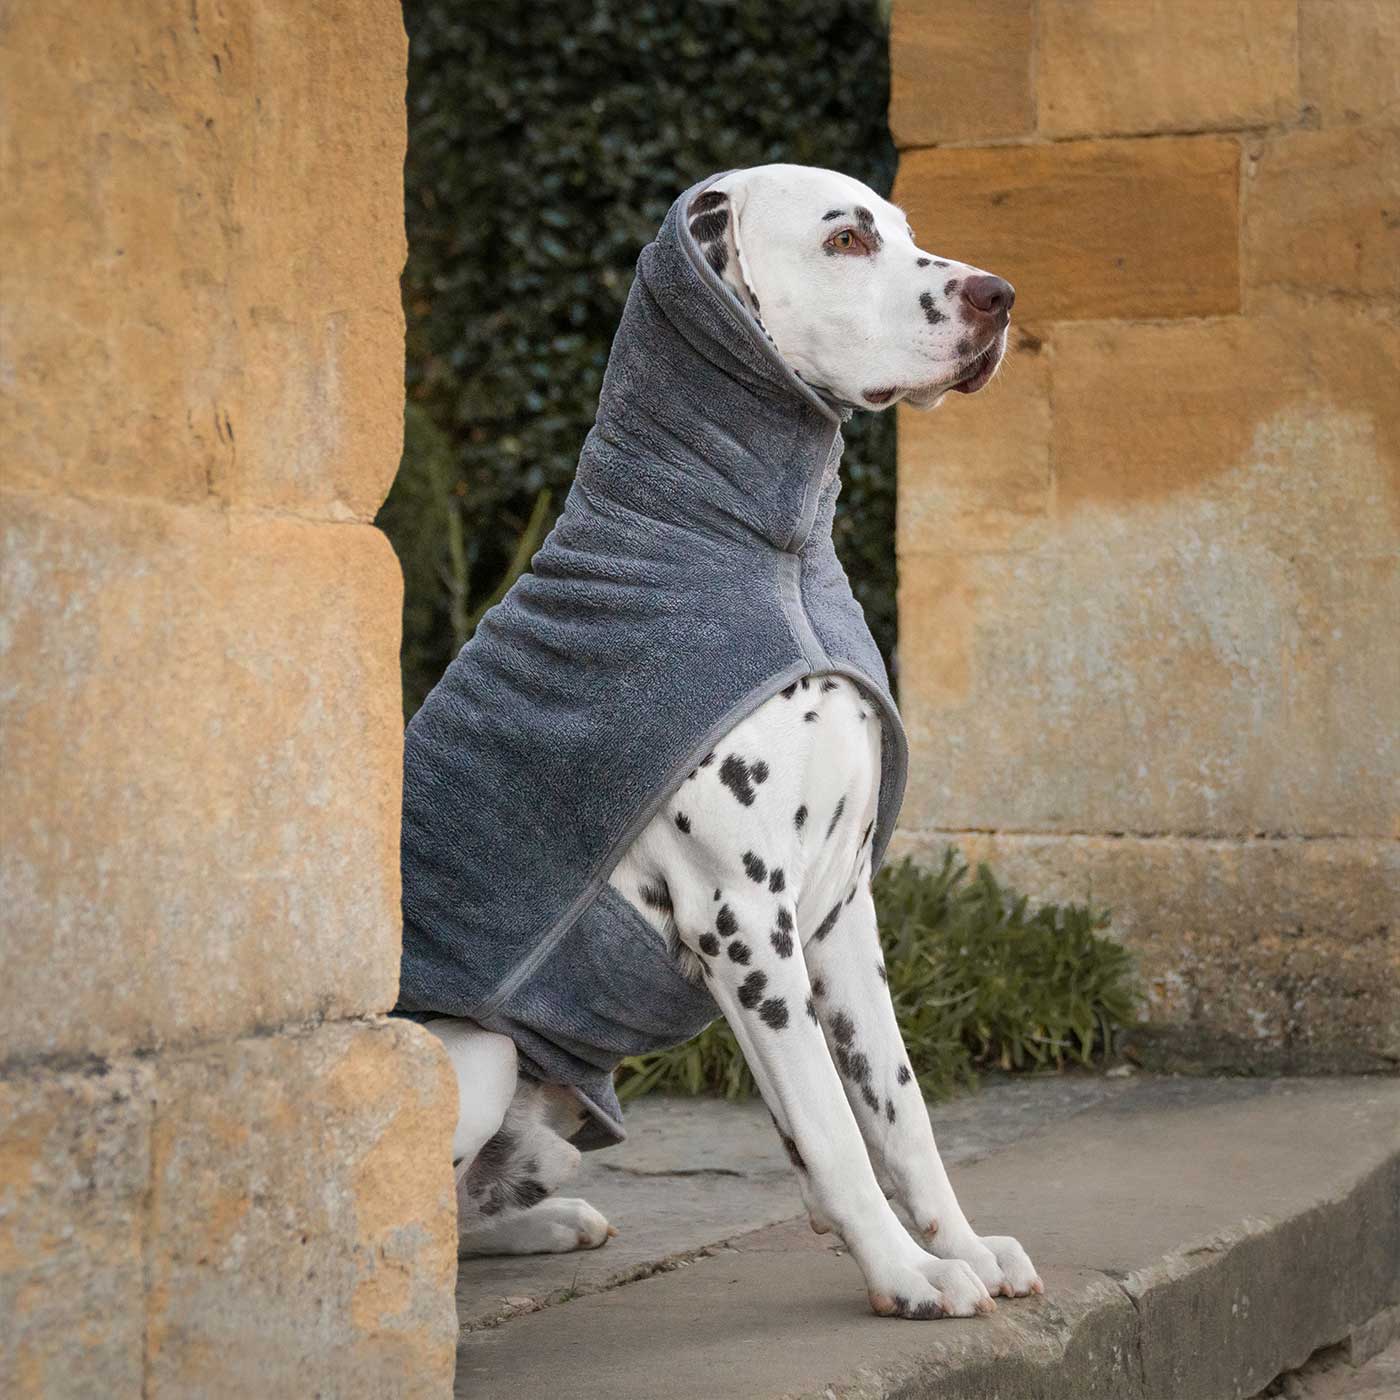 Introducing the ultimate bamboo dog drying coat in beautiful grey Gun Metal, made from luxurious bamboo to aid sensitive skin featuring adjustable Velcro neck and waist fastening with super absorbent material for easy pet drying! Available now at Lords & Labradors US, In five sizes and four colors to suit all breeds!